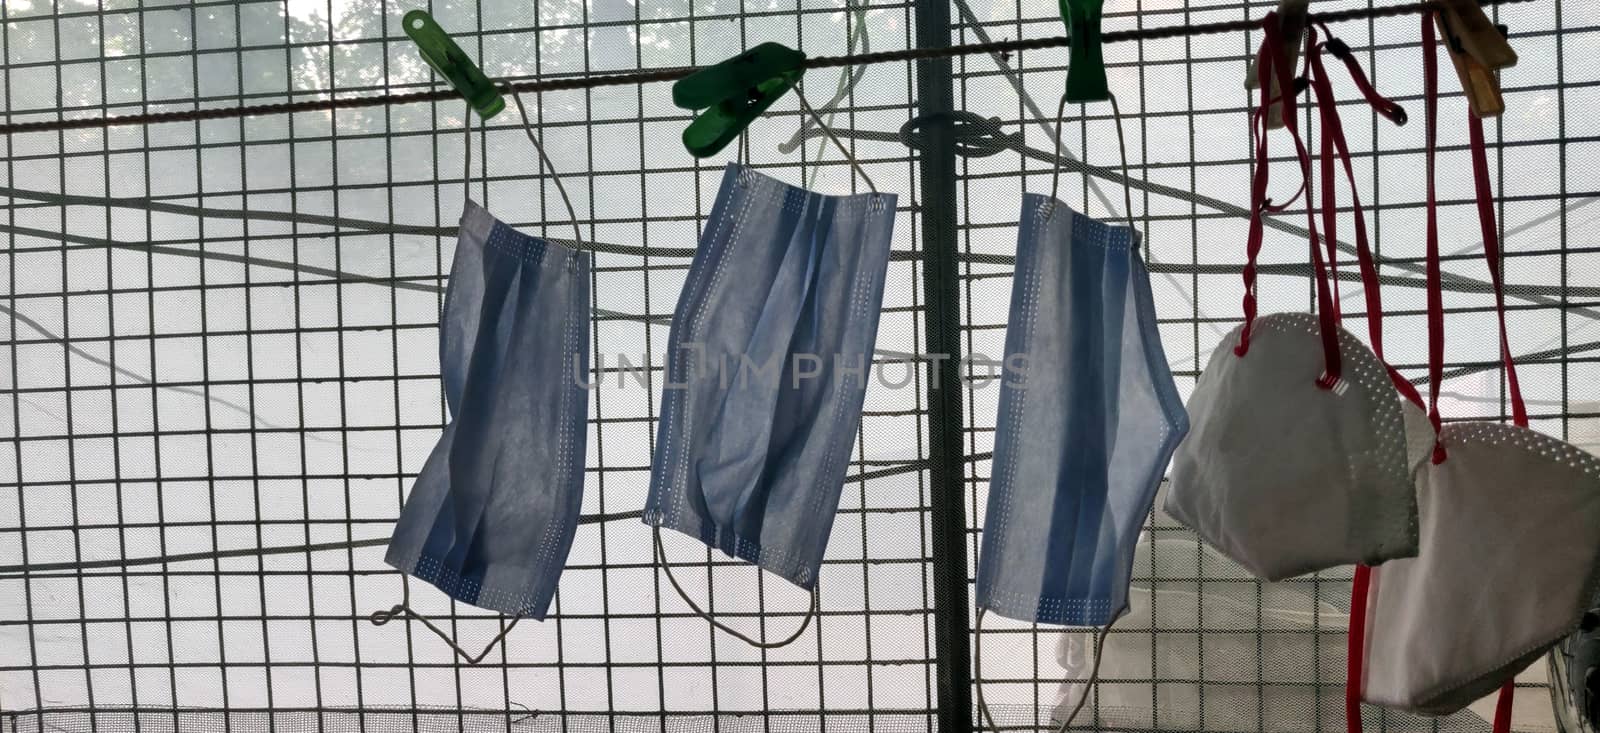 A series of N-95 and surgical mask hanging by clothes pin near a grilled window by mshivangi92